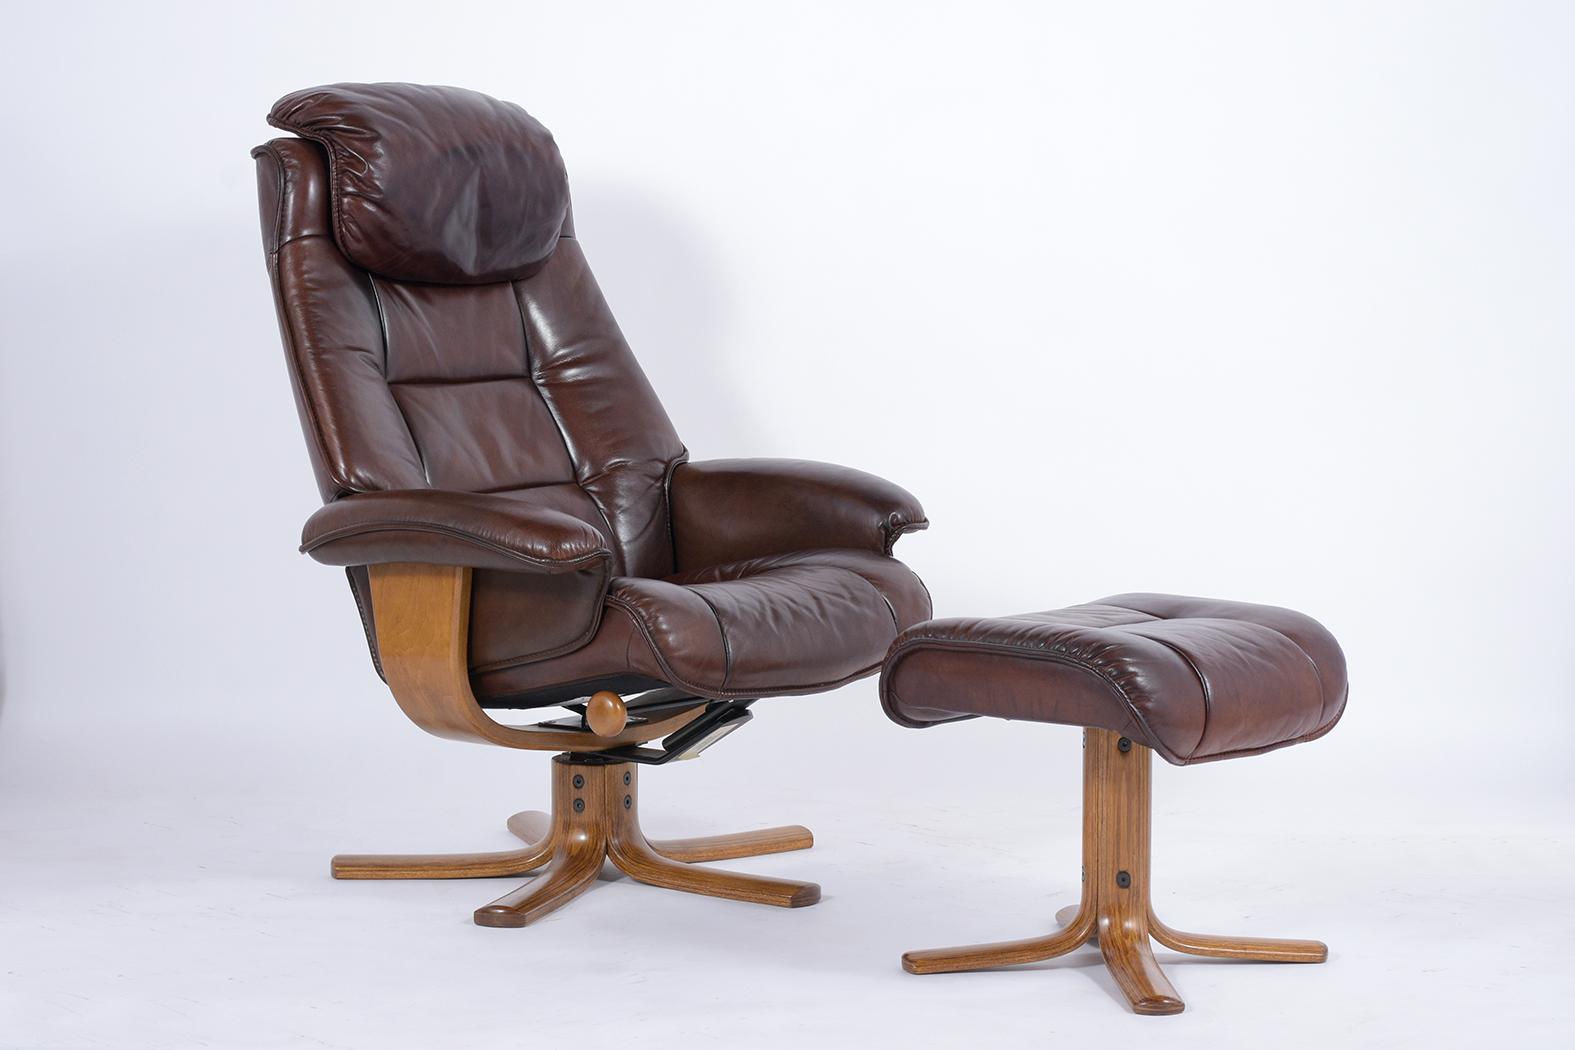 Hand-Crafted 1980s Danish Leather Lounge Chair & Ottoman Set - Vintage Elegance For Sale